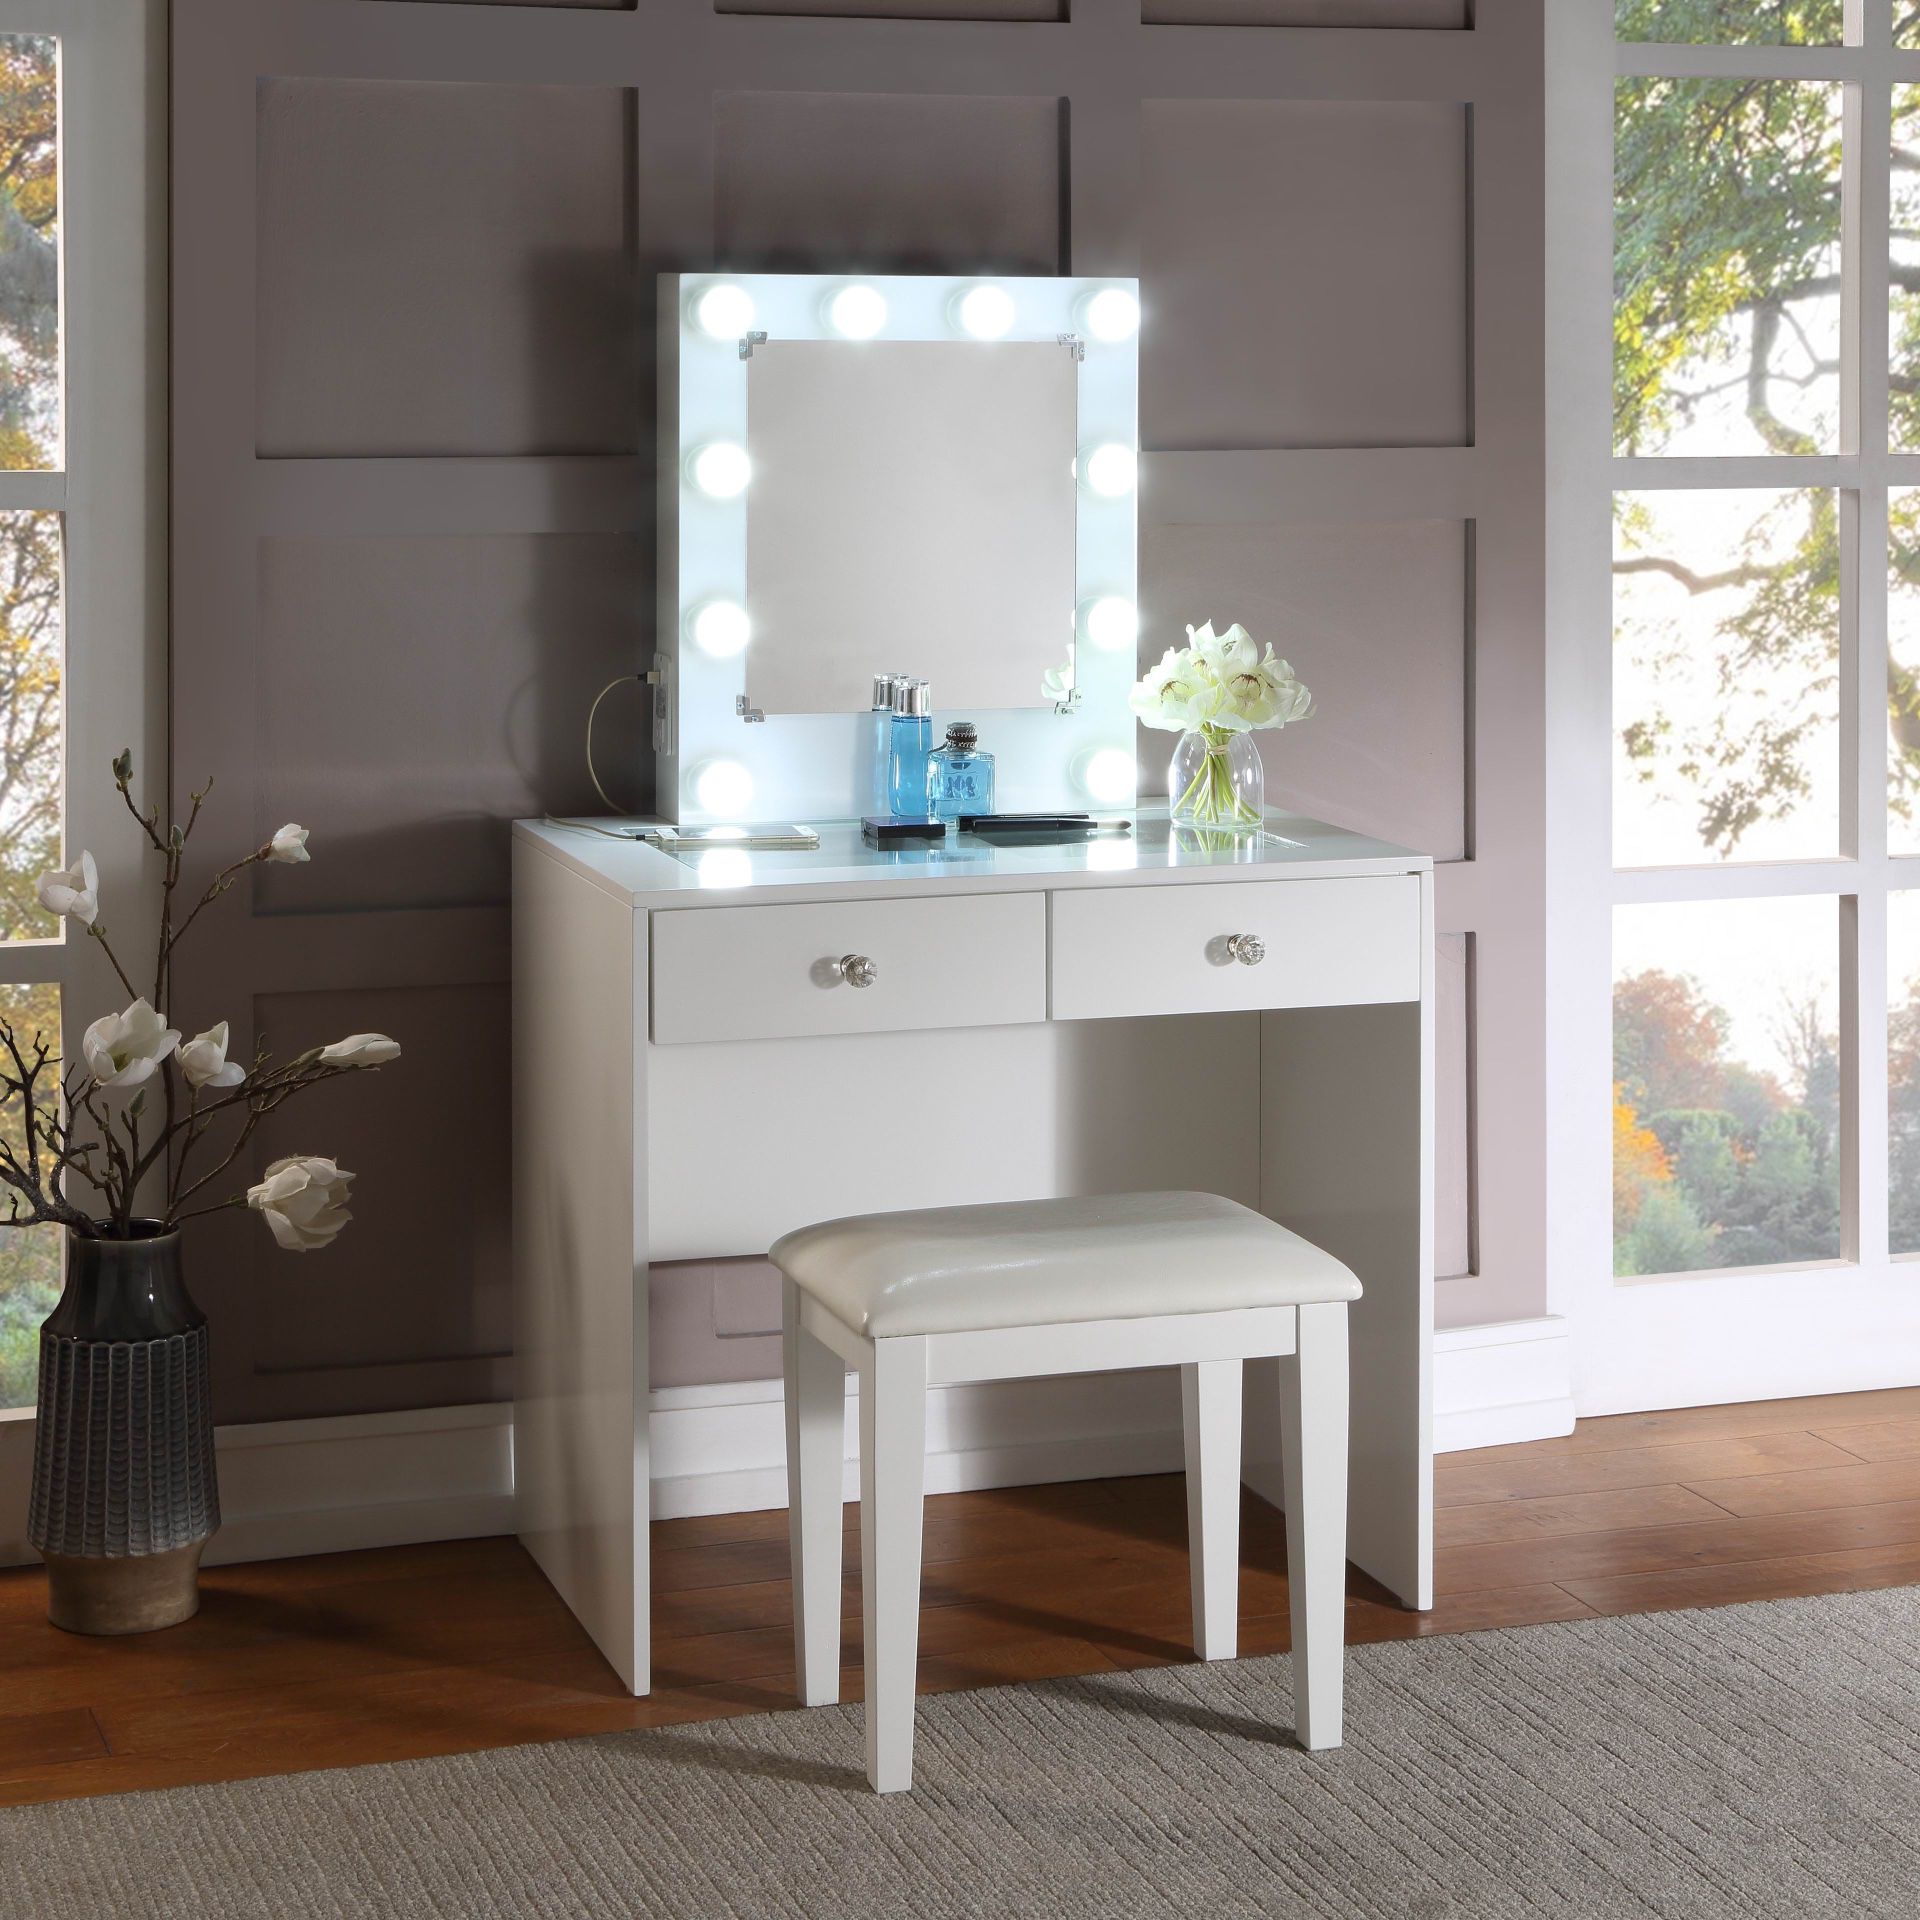 Makeup Vanity And Stool In White Finish